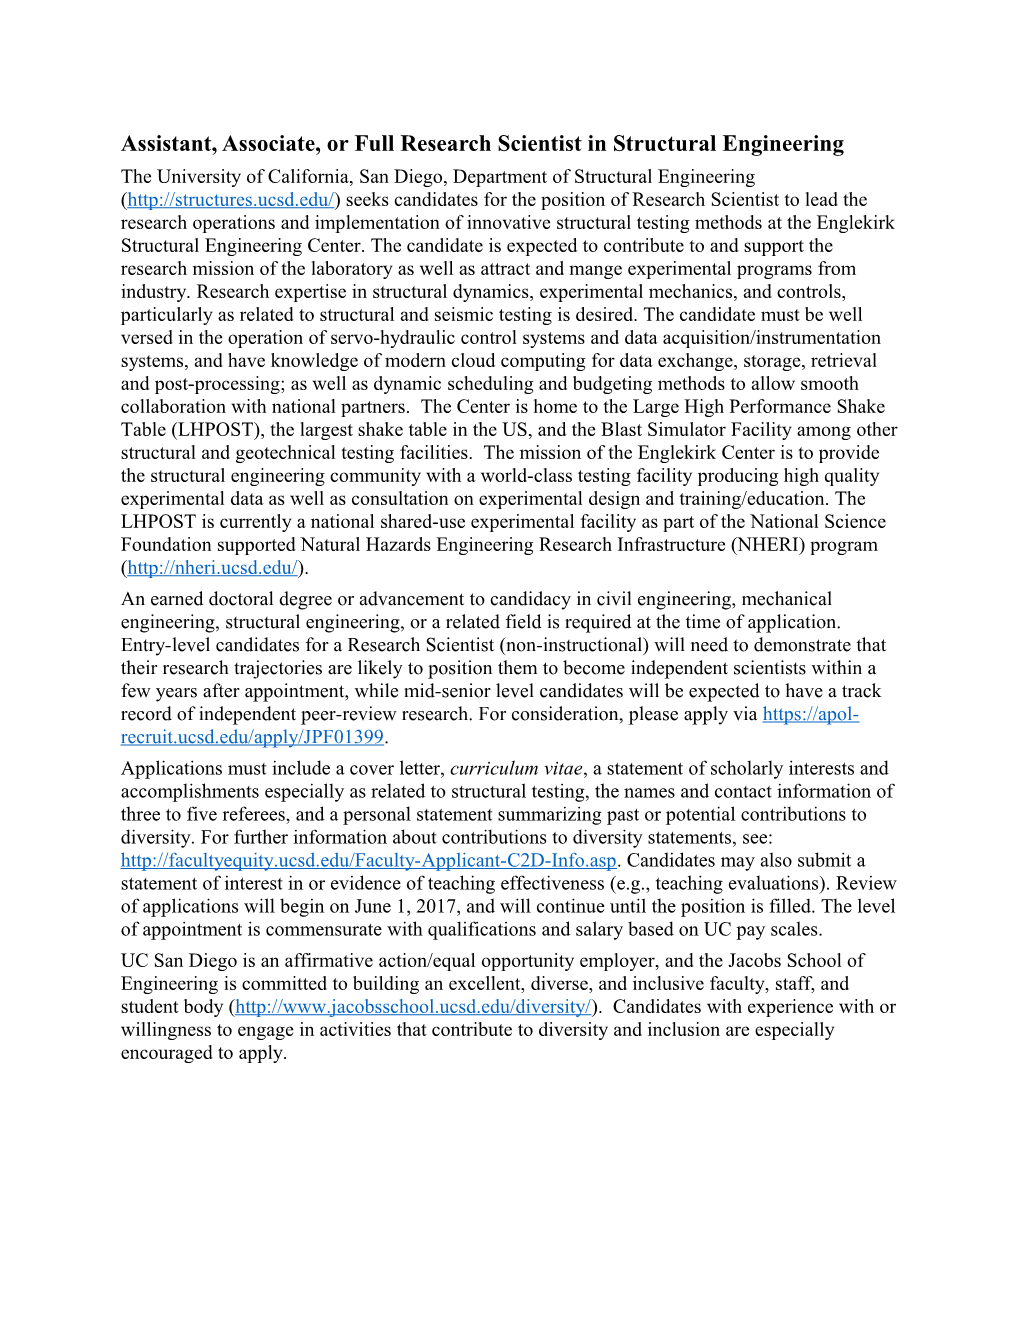 Assistant, Associate, Or Full Research Scientist in Structural Engineering